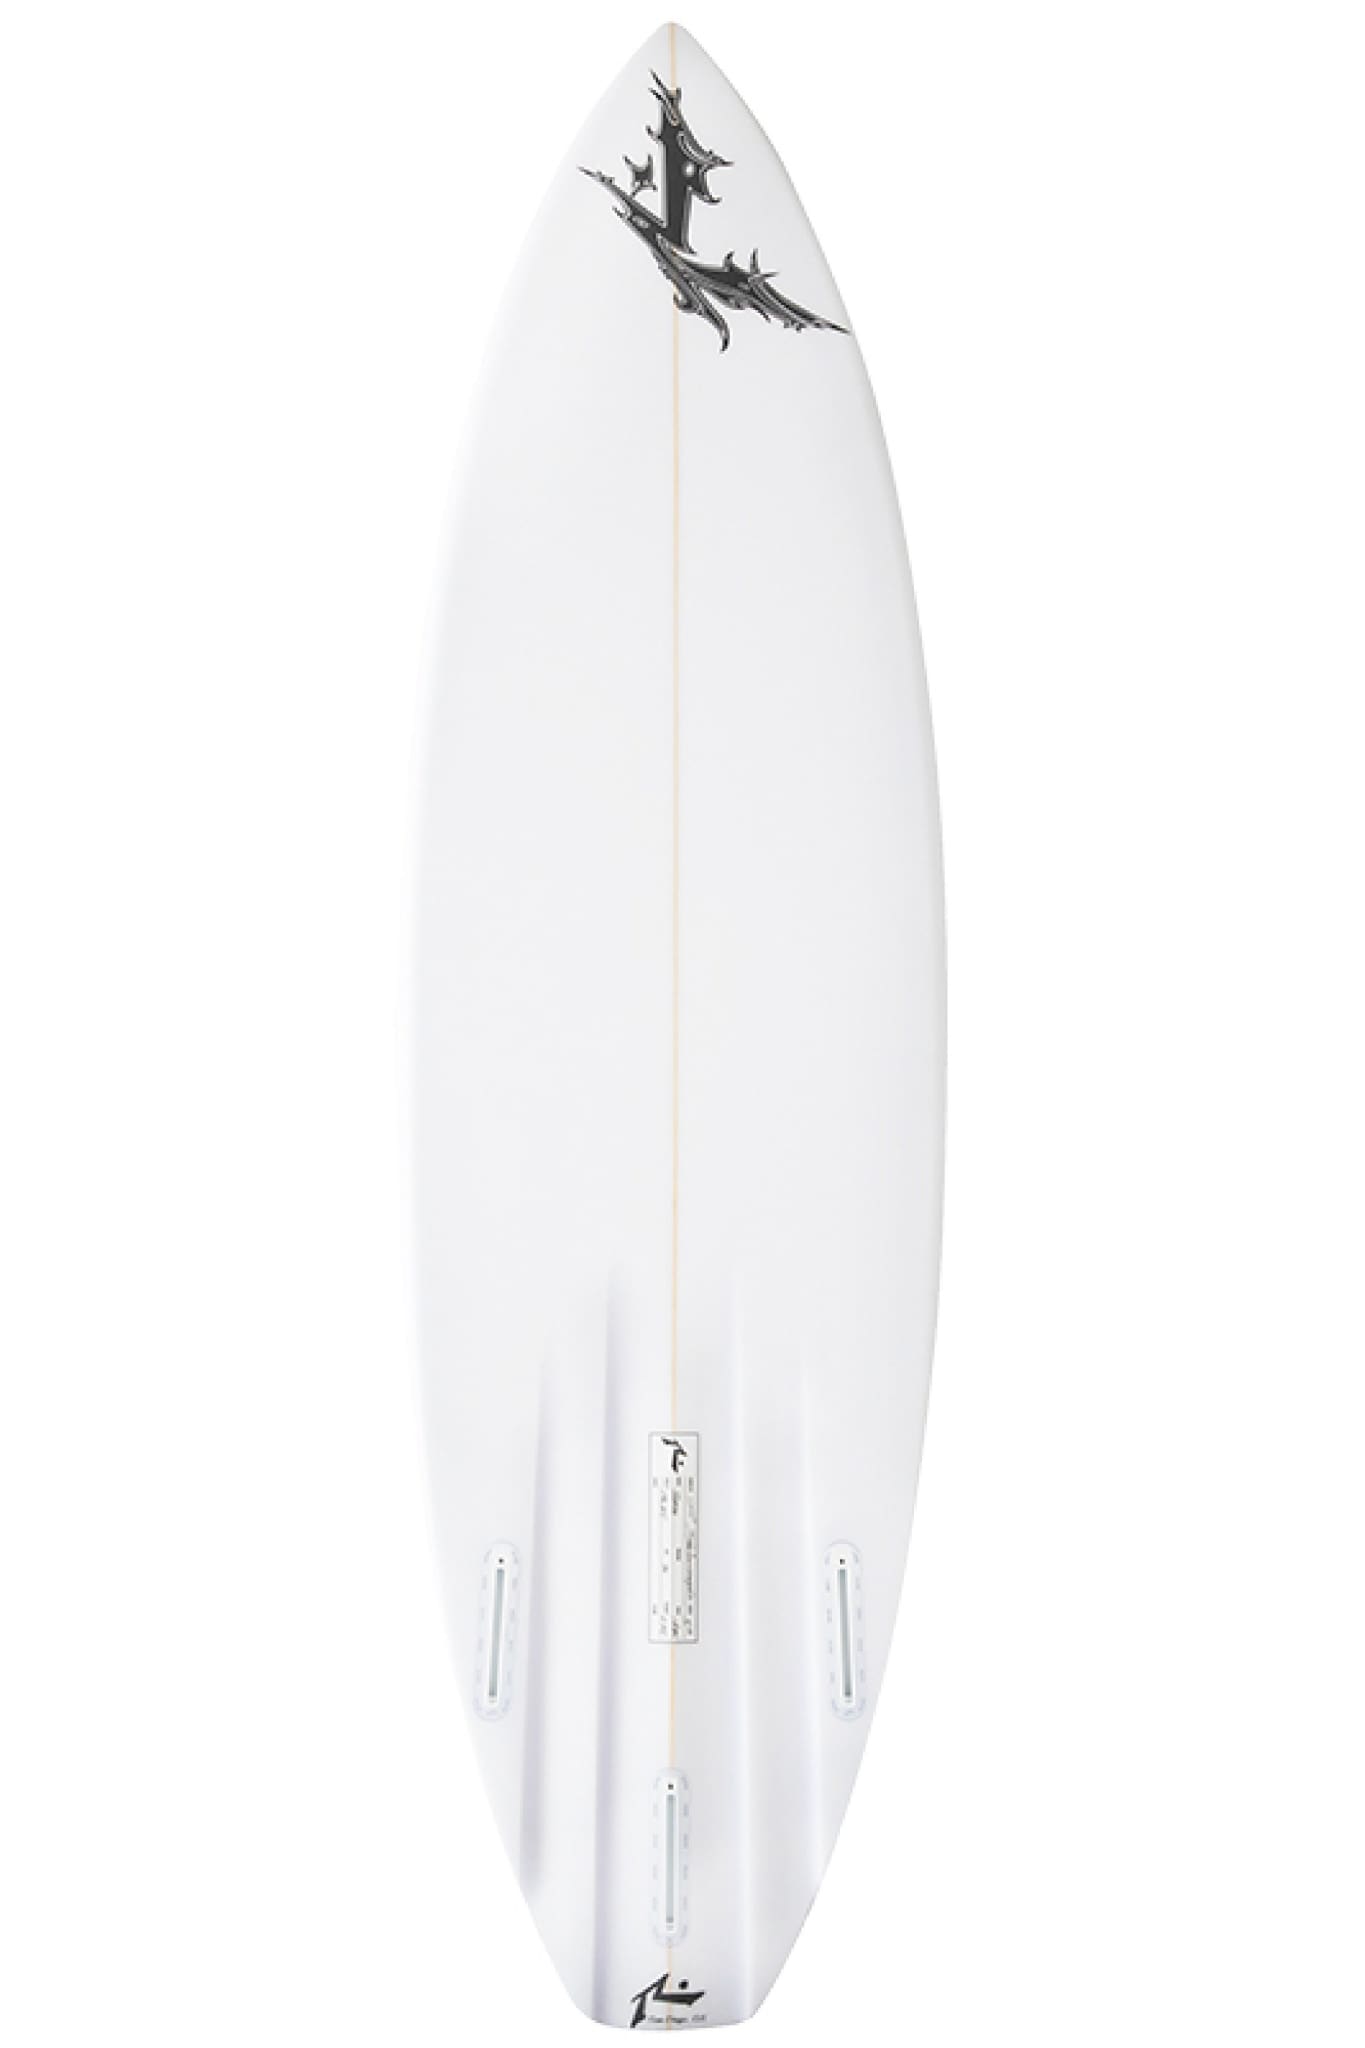 The Blade | Surfboards-Rusty Surfboards South Africa